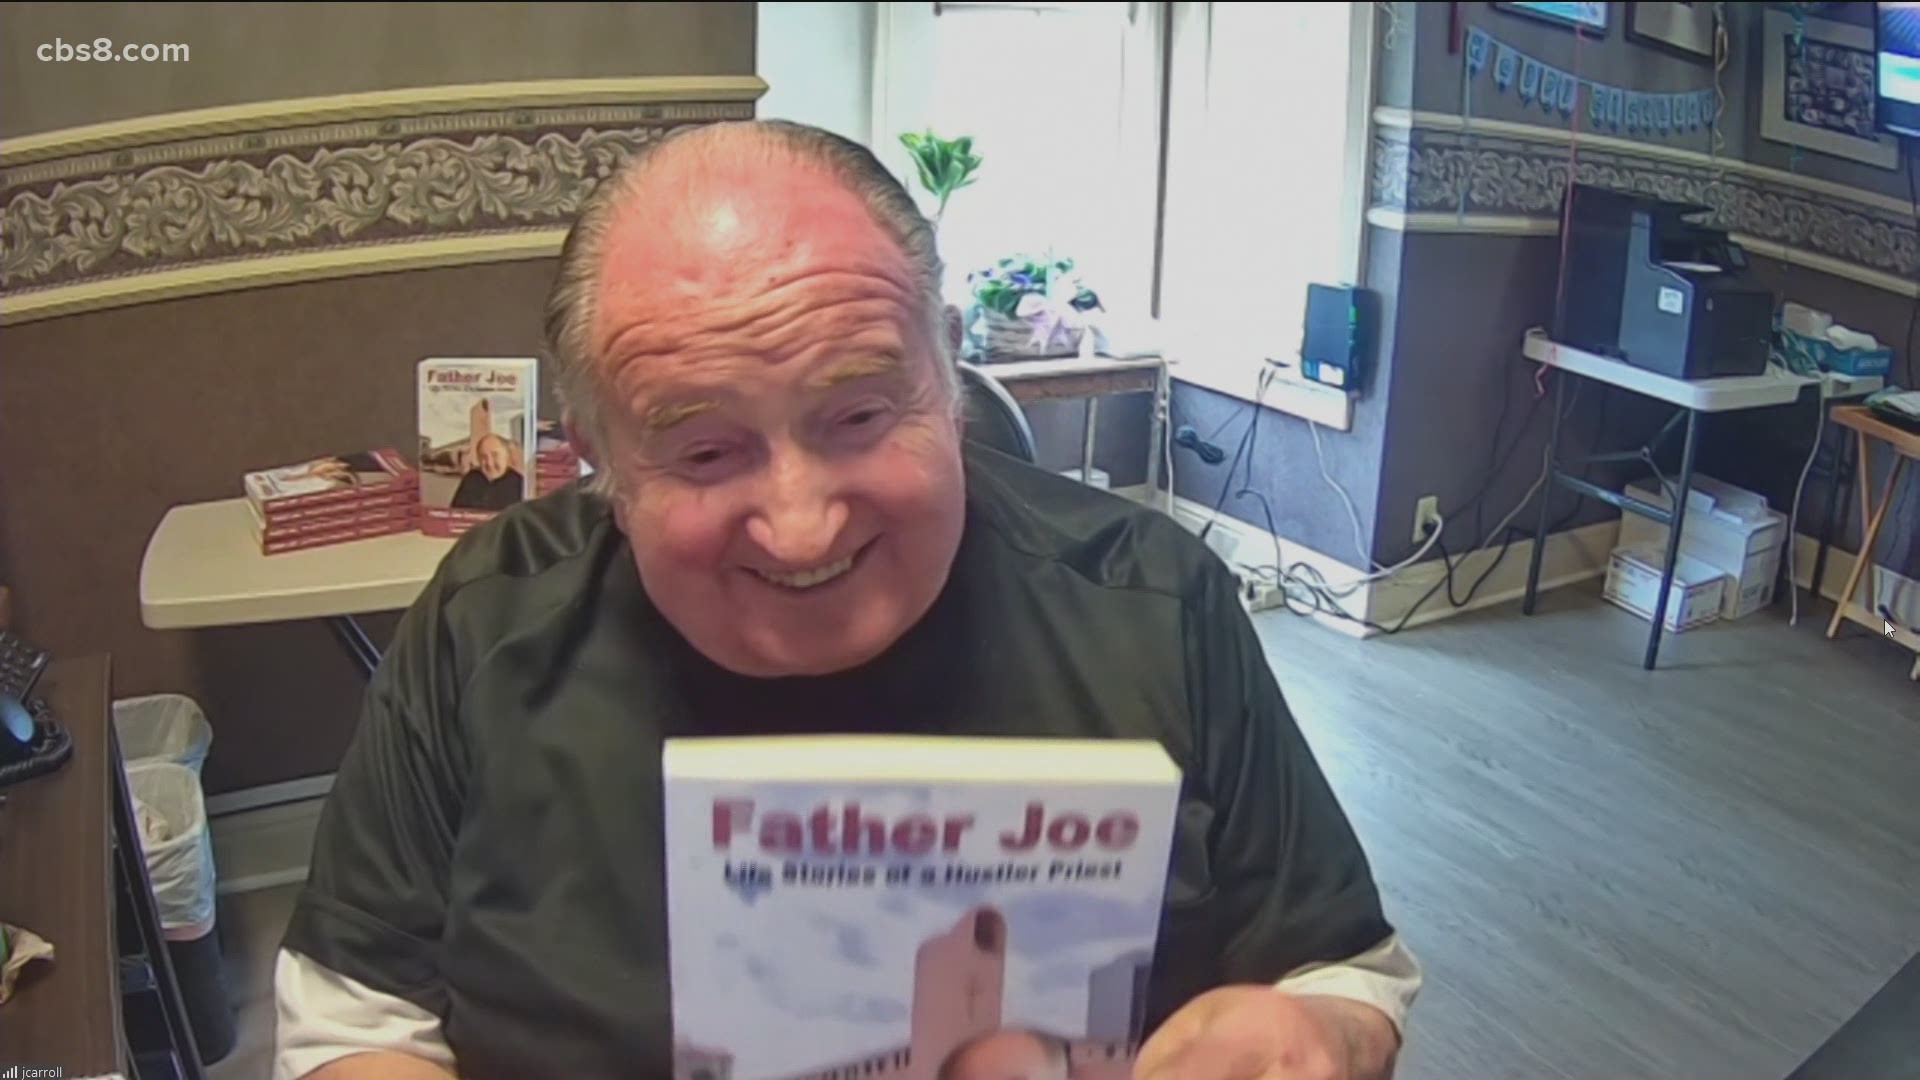 Father Joe has dedicated his life to ending homelessness and helping others in San Diego.